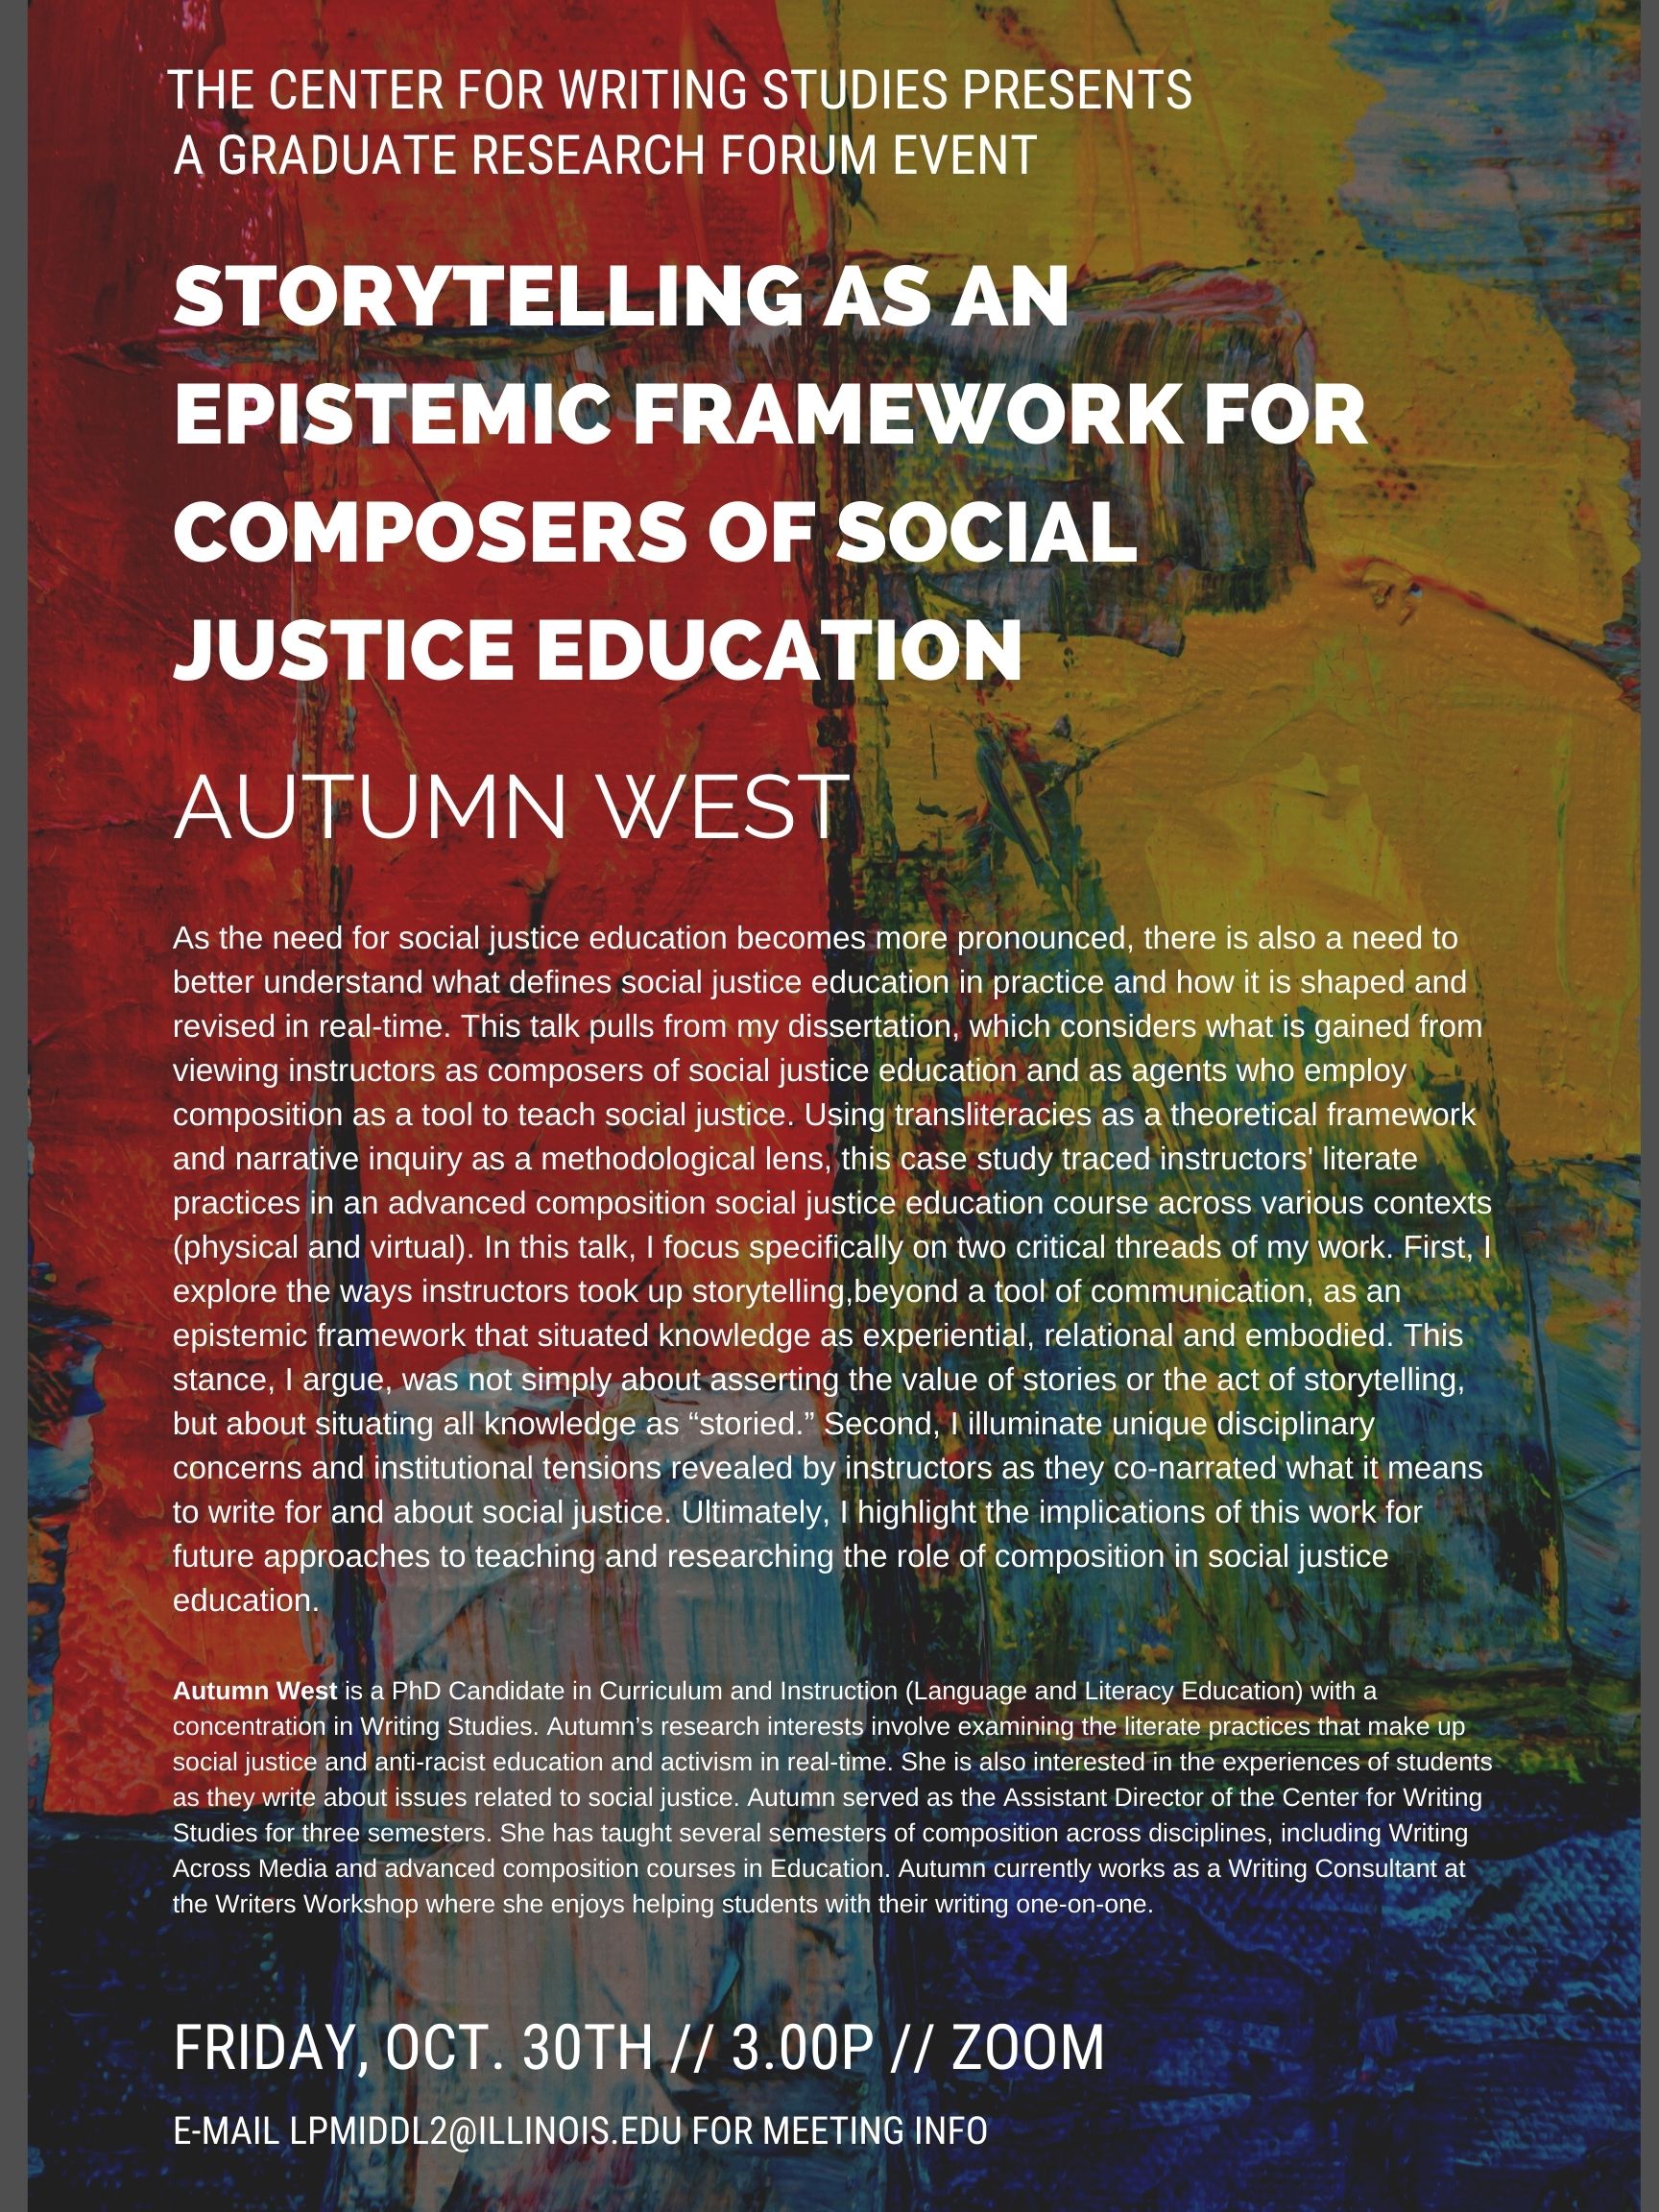 Event flyer with abstract red, yellow, green, and blue painted canvas background. White text appears at top and reads “The Center for Writing Studies Presents A Graduate Research Forum Event.” In bolder, white text below, the title of the talk is listed: “Storytelling as an Epistemic Framework for Composers of Social Justice Education” along with Autumn West’s (the presenter) name.  Below, two blocks of white text comprise the bulk of the flyer: a talk abstract and a bio. Logistics details are below.